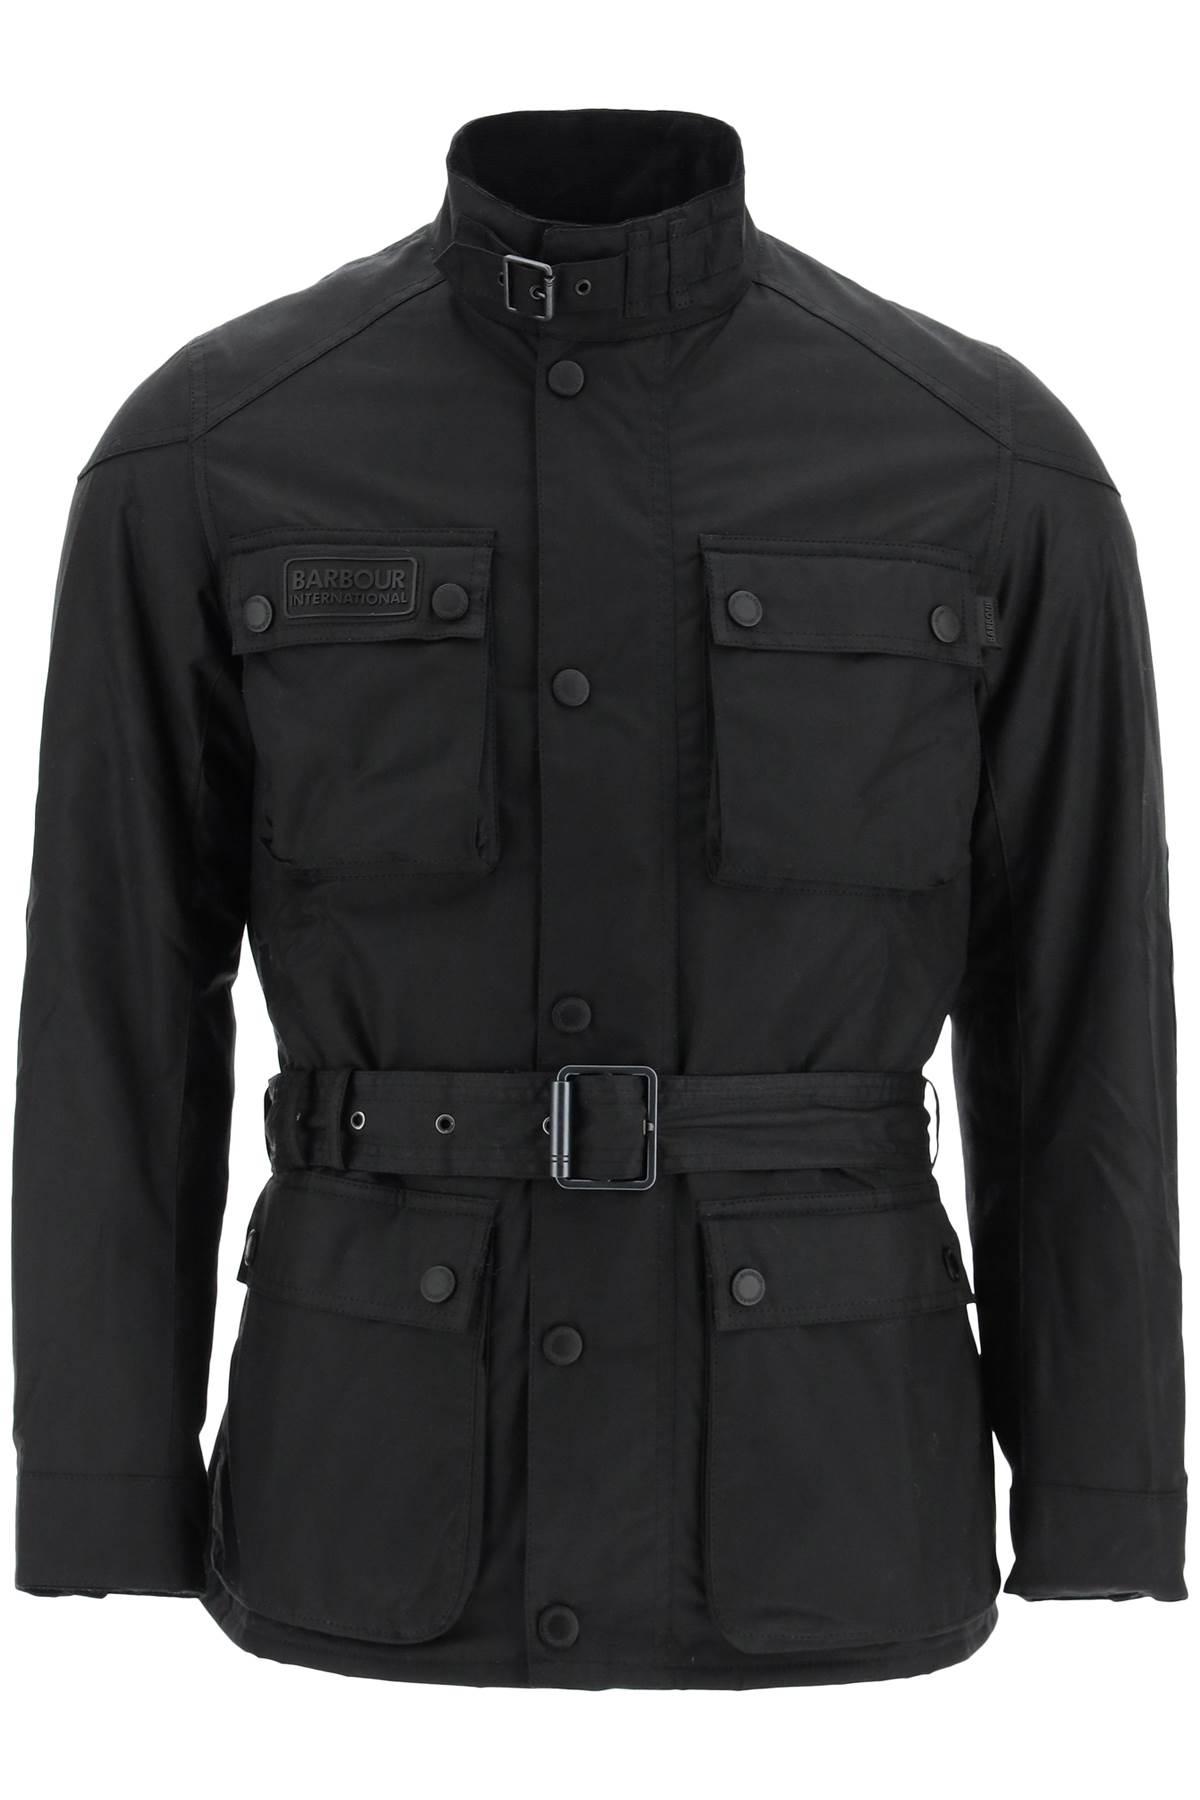 Barbour Blackwell International Jacket In Waxed Cotton for Men | Lyst